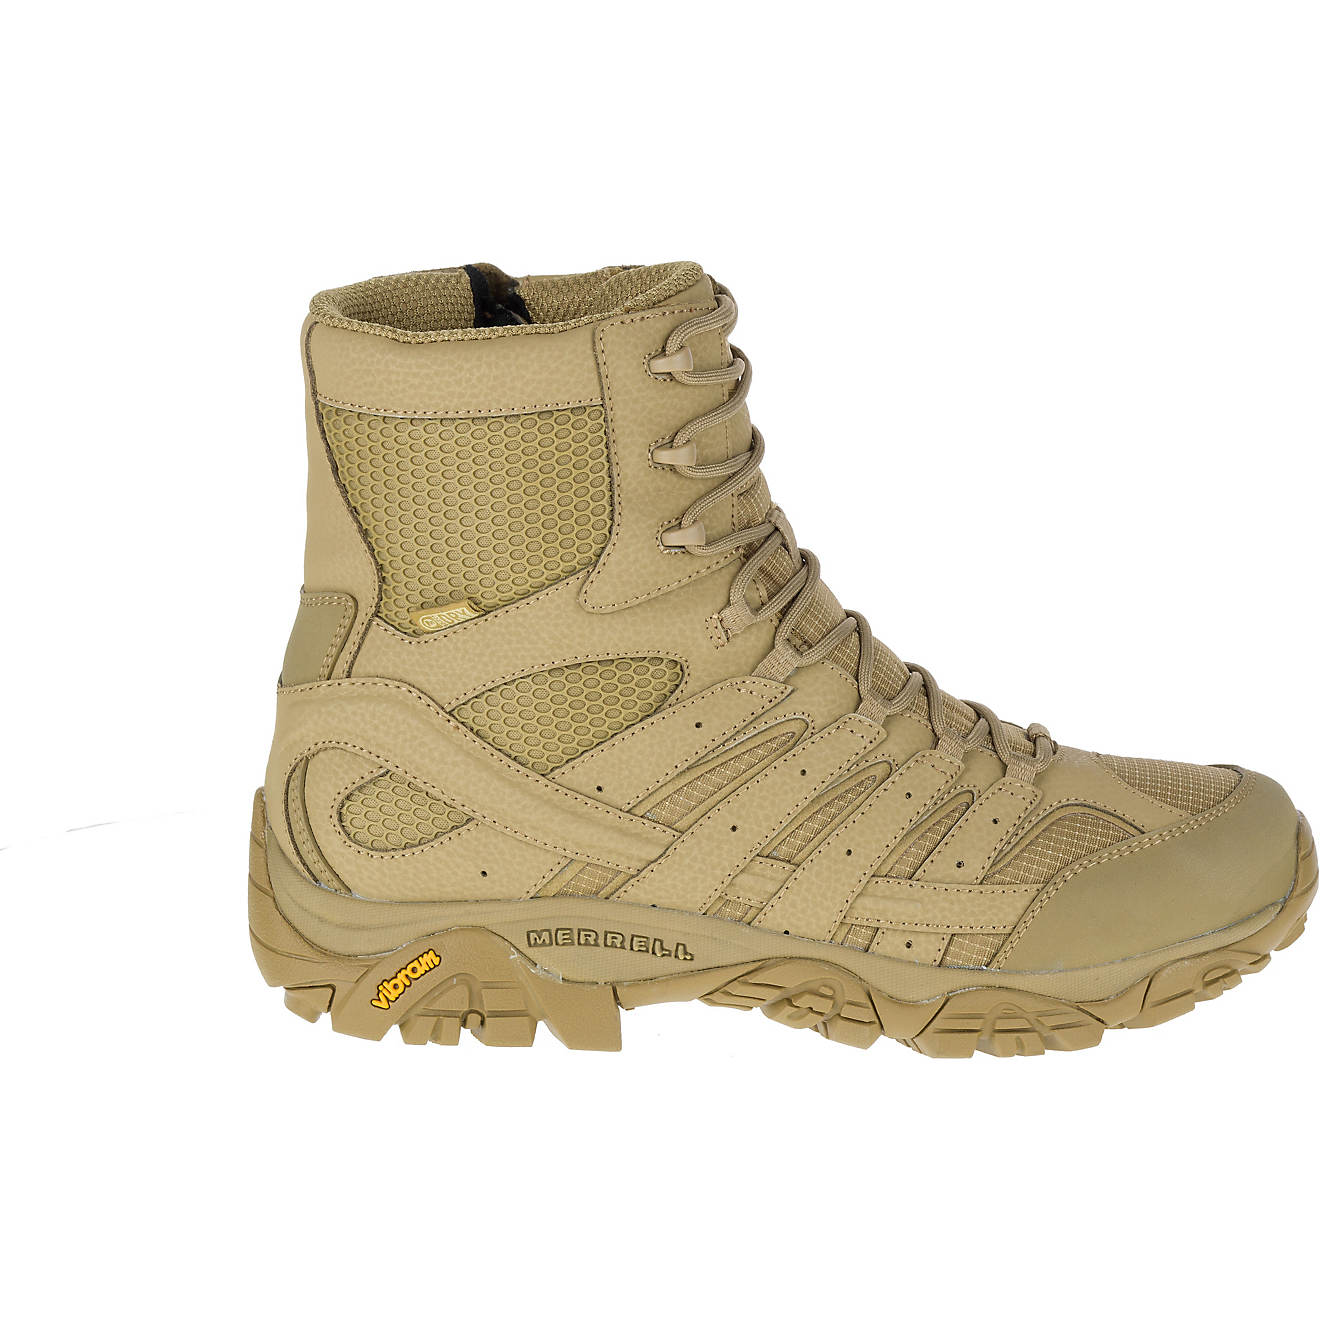 Merrell Men's Moab 2 EH Tactical Boots | Free Shipping at Academy